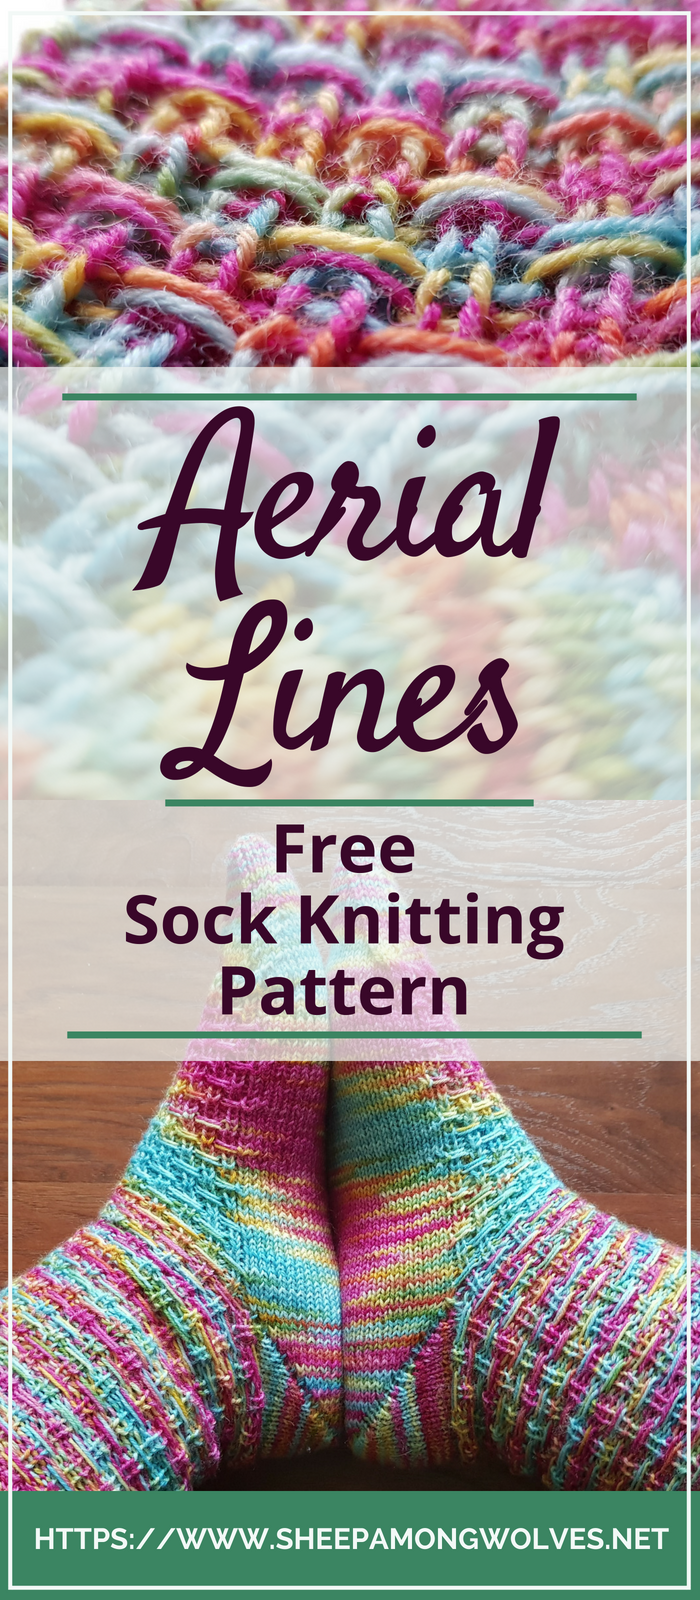 Aerial Lines is my new sock pattern - and it's free! Perfect for those beautiful variegated yarns in your stash. Give it a try and tell me how you liked it!